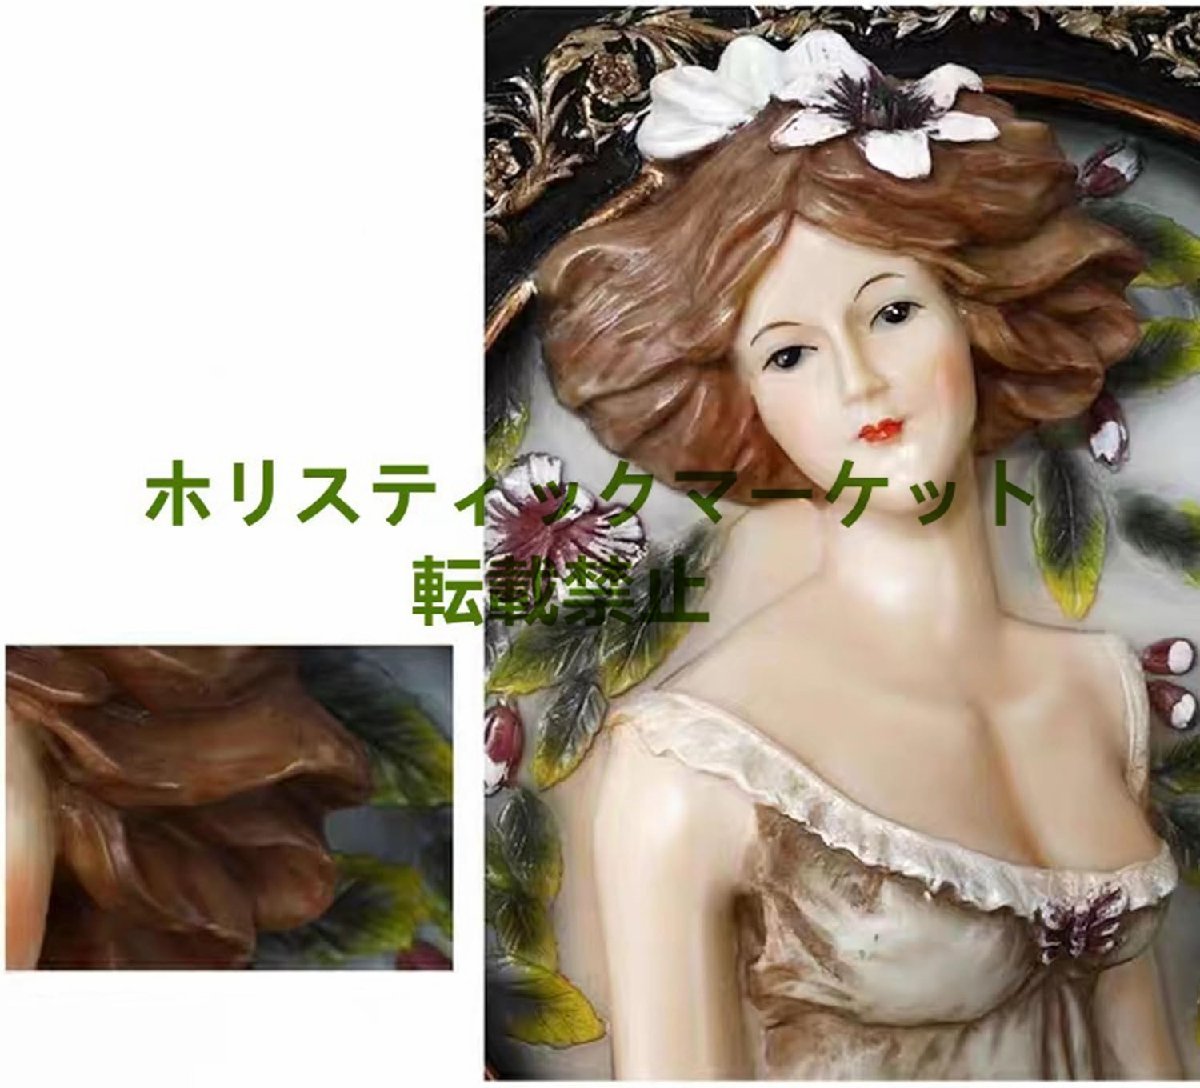  ultimate beautiful goods * Northern Europe manner handicraft western sculpture carving image young lady wall decoration ornament relief objet d'art interior miscellaneous goods resin interior part shop hand made handmade 